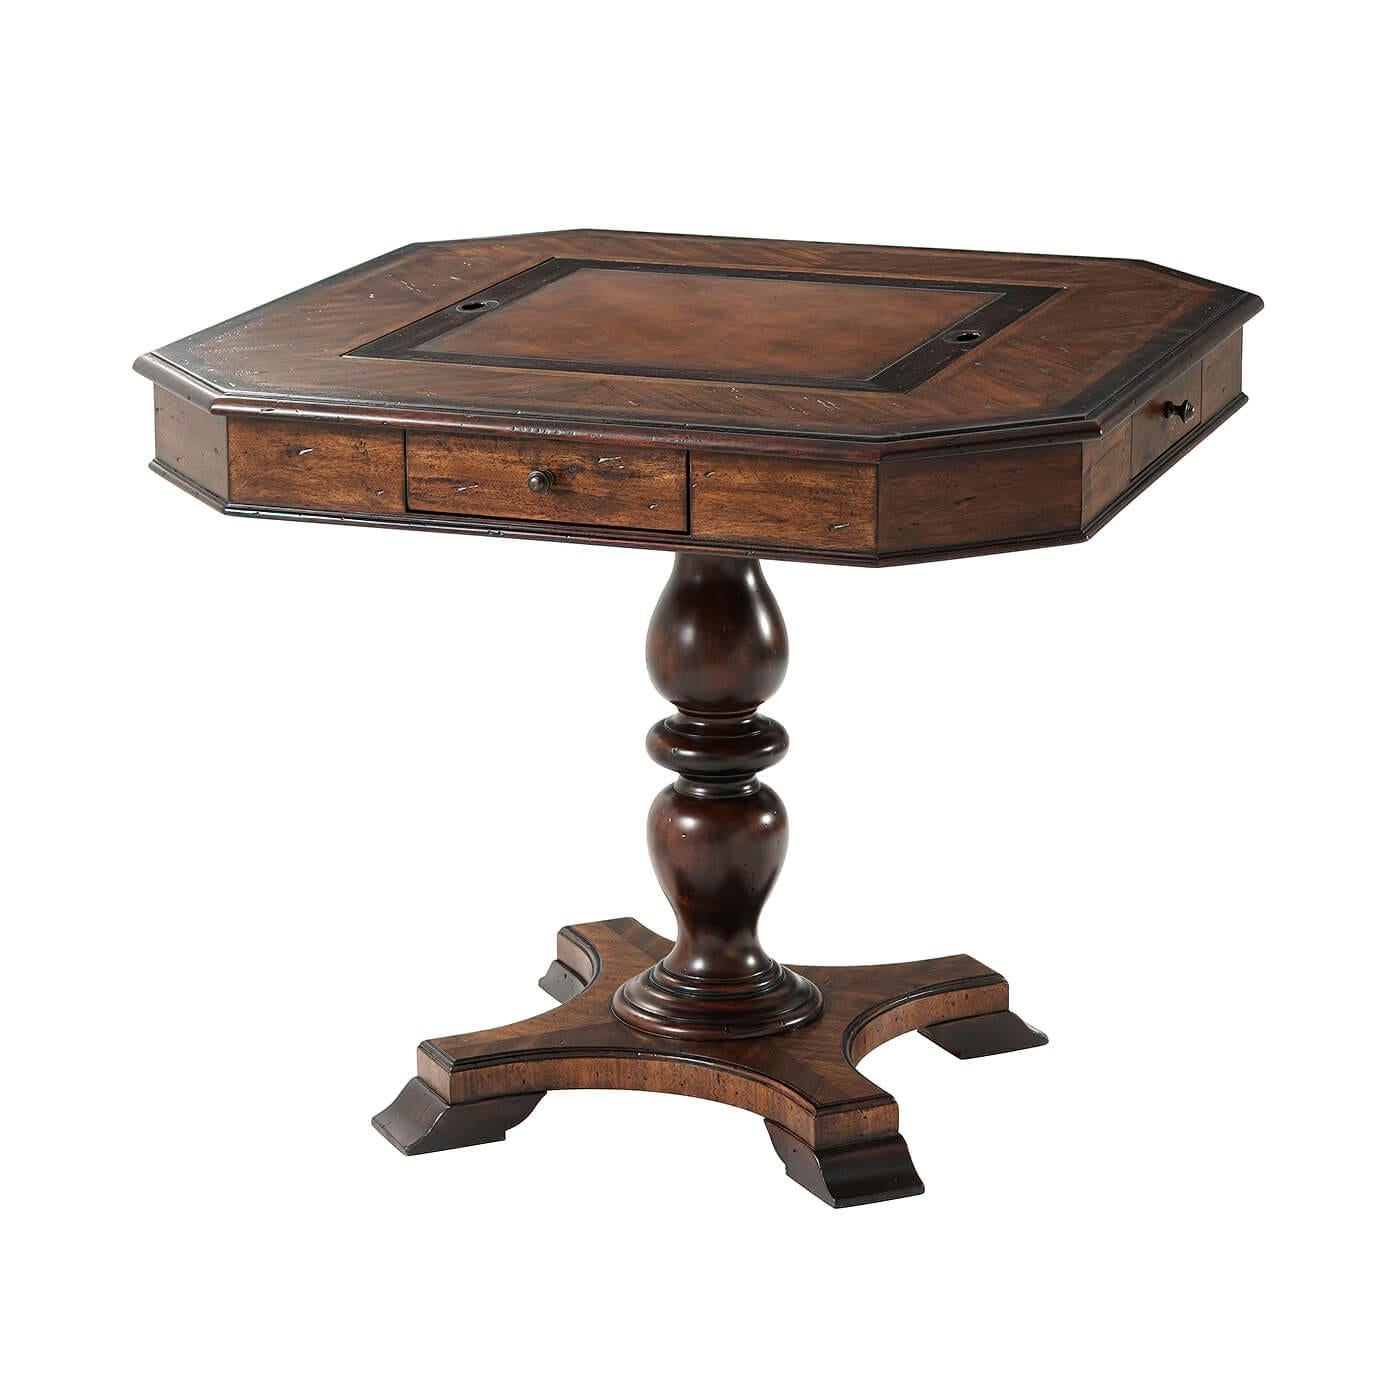 Dark stained rustic game table with a canted corner top, made of mahogany, acacia and oak parquetry, a reversible leather and chess inlaid center, an inlaid Backgammon board in well on a turned column pedestal base. Includes a wooden chess set and